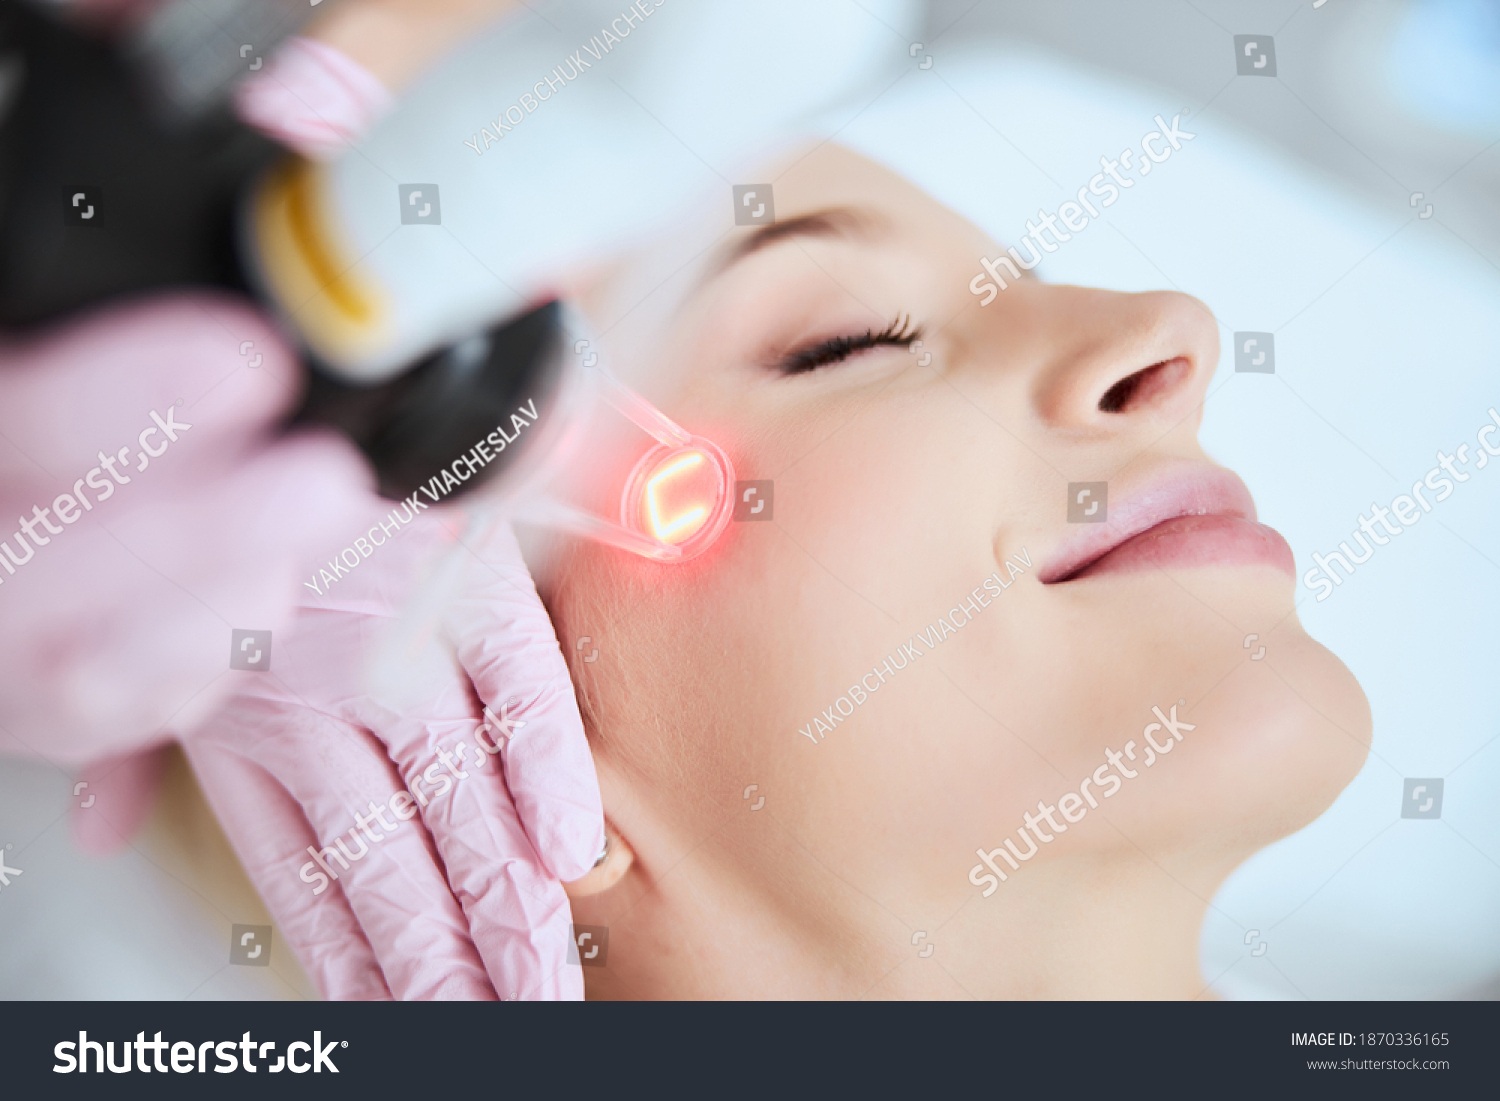 Close up portrait of a young woman patient receiving a laser treatment in a spa salon #1870336165